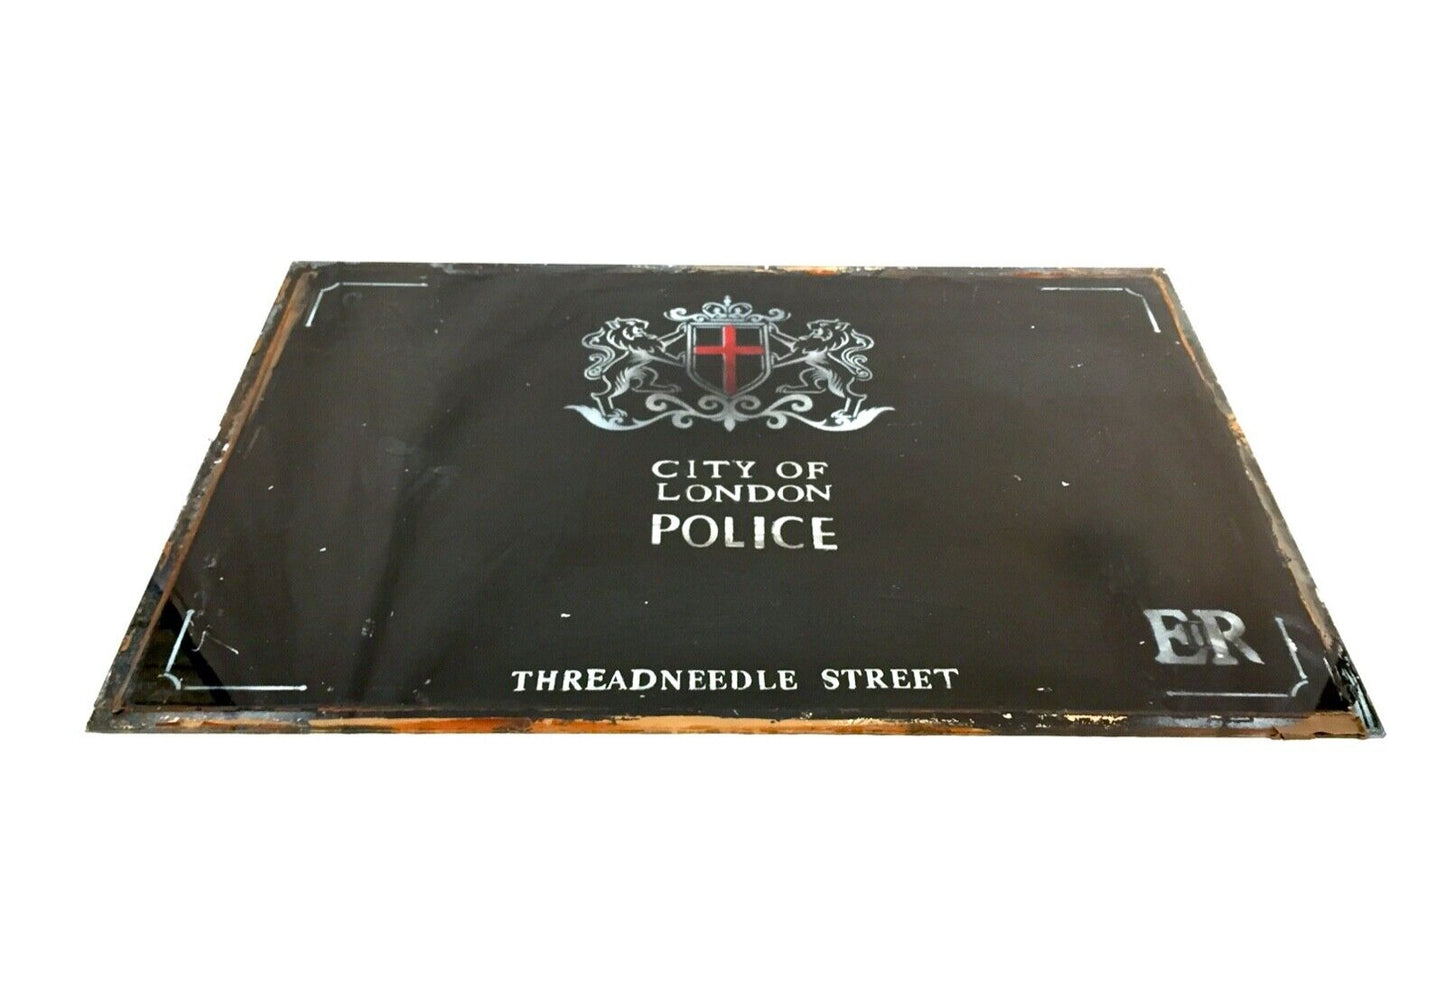 Antique Advertising - City of London Police Threadneedle Street Glass / Sign